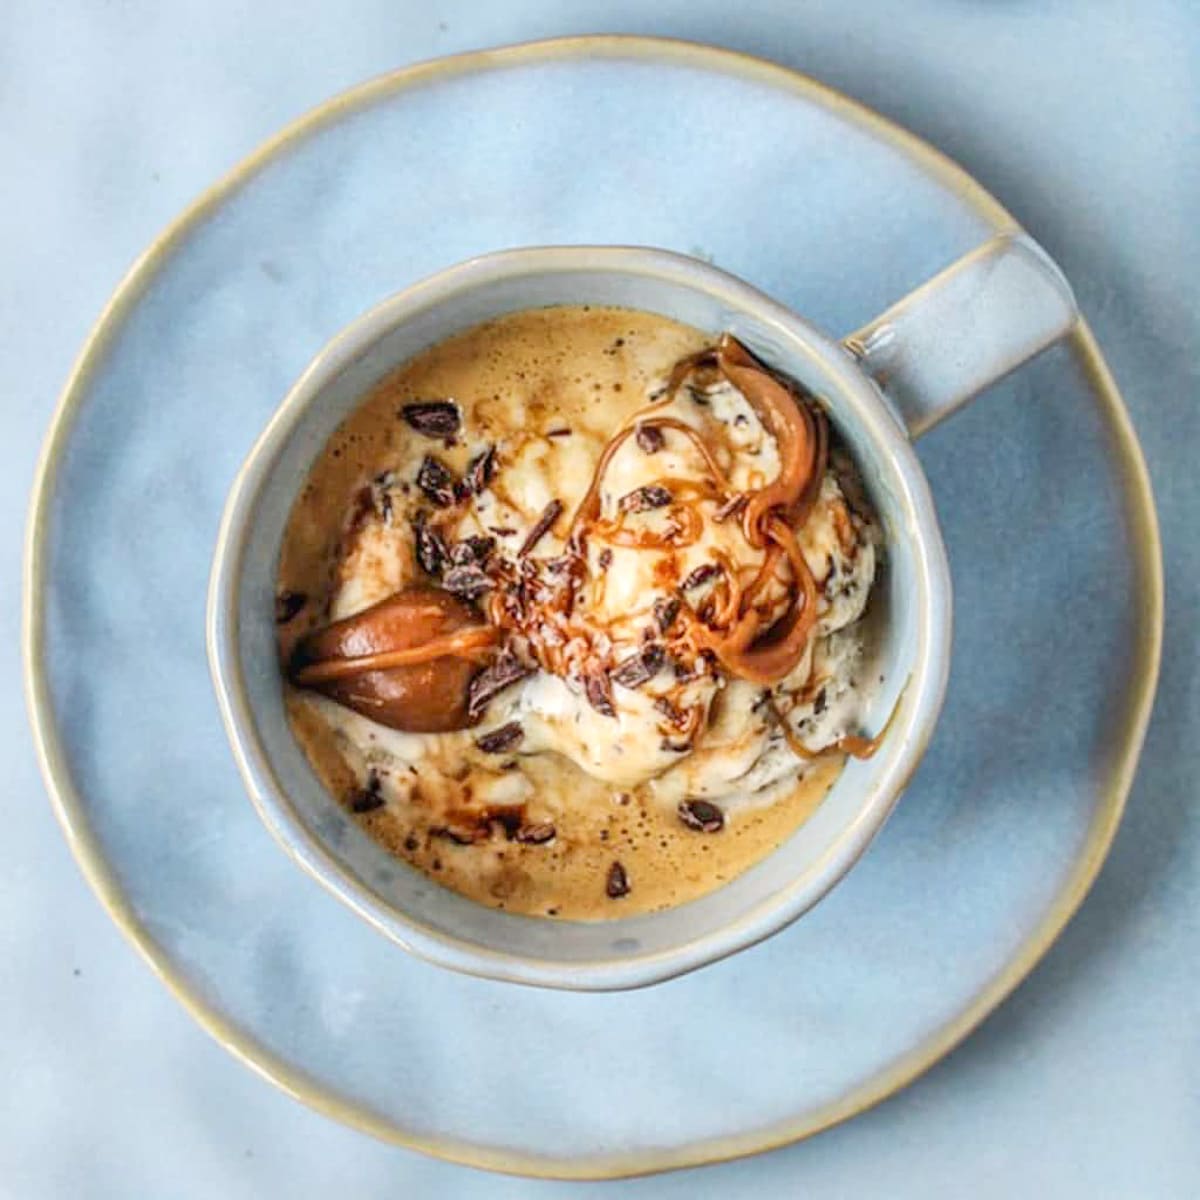 Cup of espresso with vanilla ice cream topped with caramel and chocolate curls.